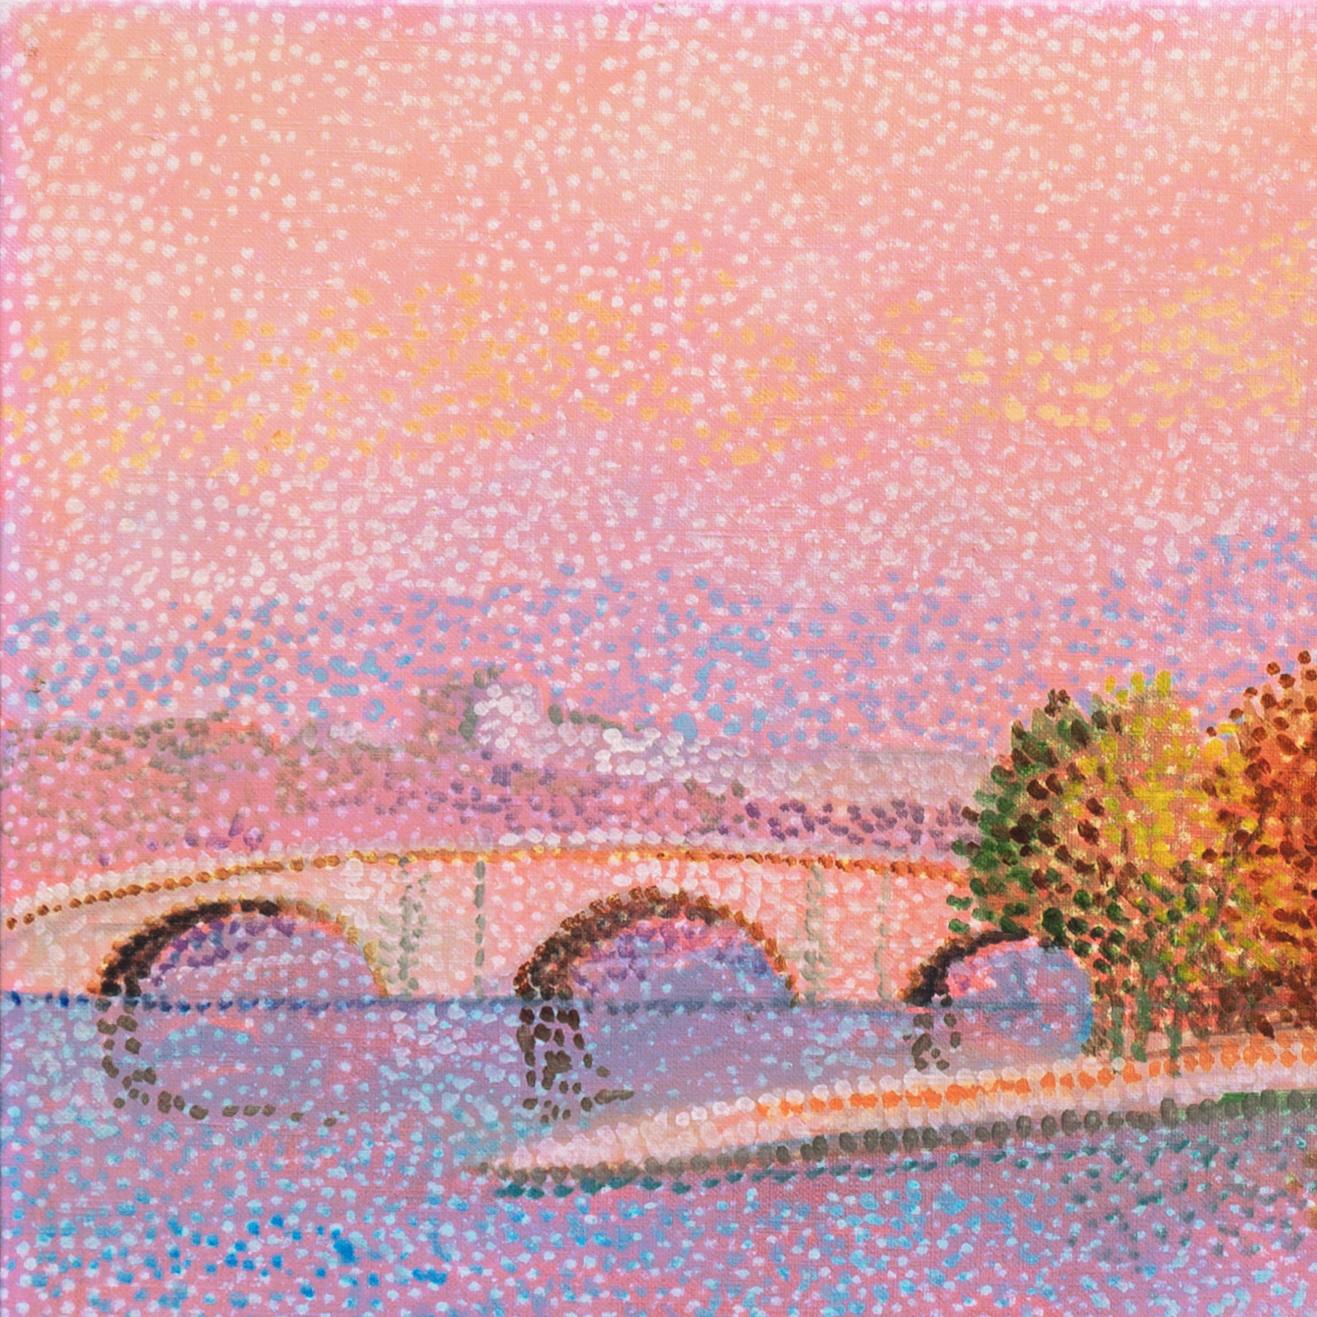 Signed lower left, 'Th. Butler' and painted circa 1985.

A substantial Pointillist oil showing a view of the Seine with the Pont Neuf and the Île de la Cité. In the foreground, two young women are strolling by the river. In the distance, a fisherman